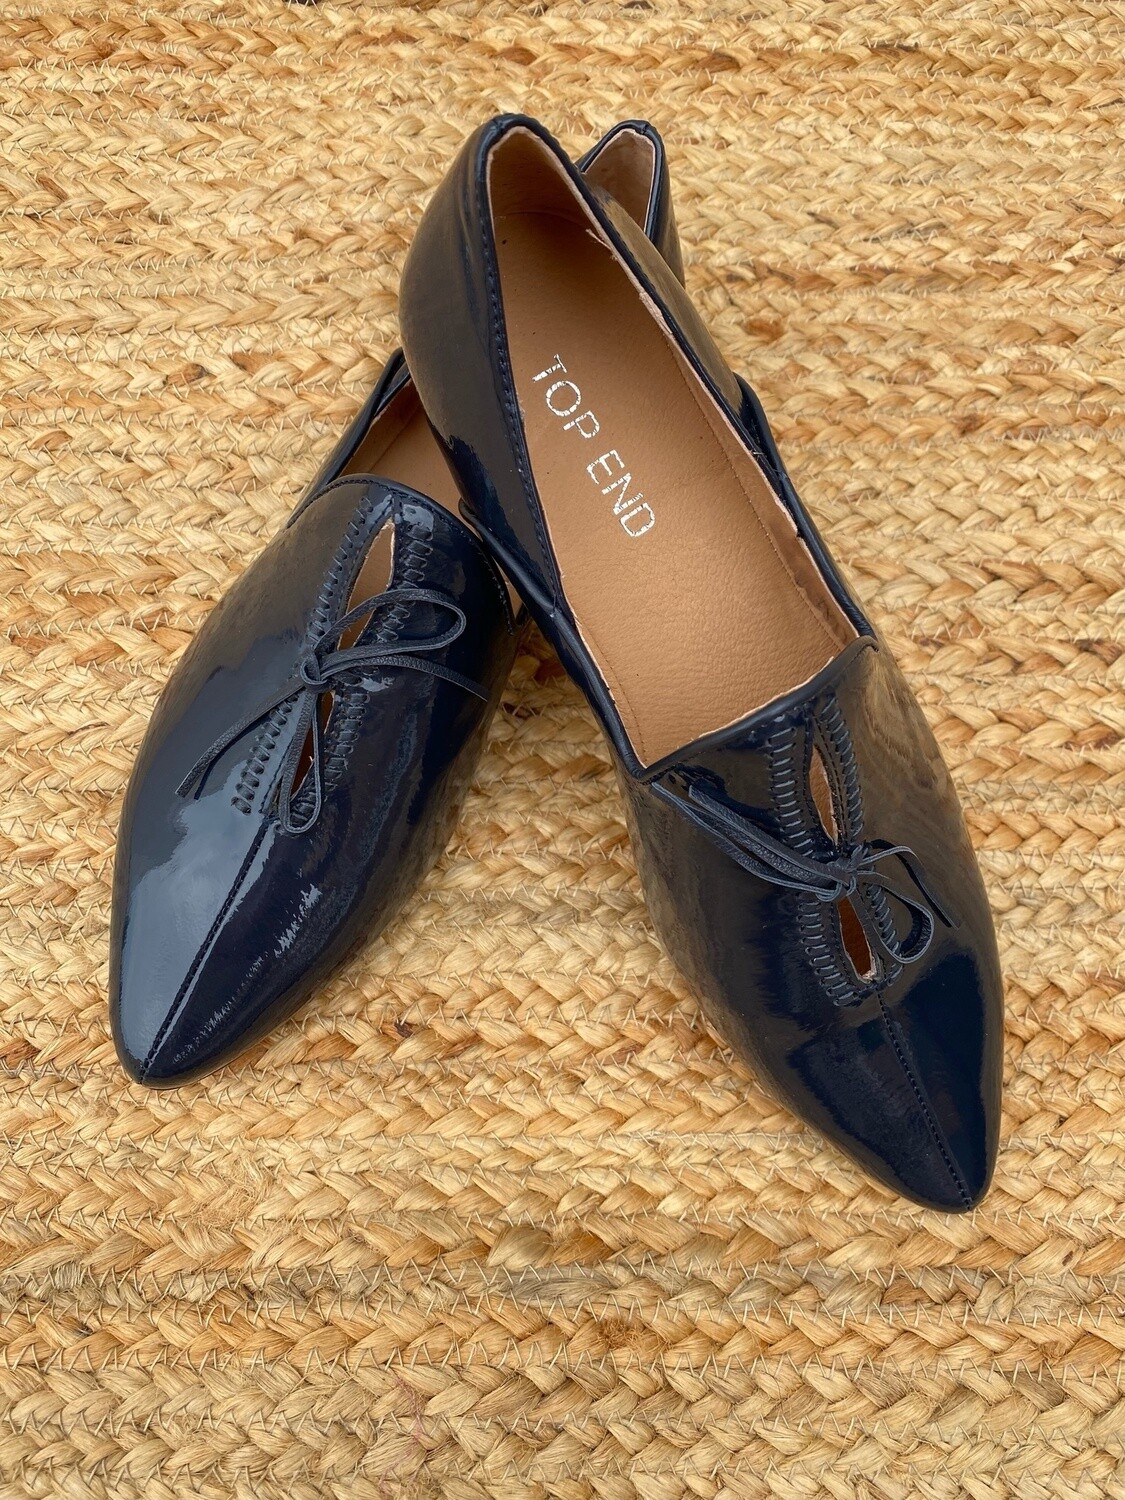 SOMMER PATENT LEATHER LOAFER - NAVY, Size: 37